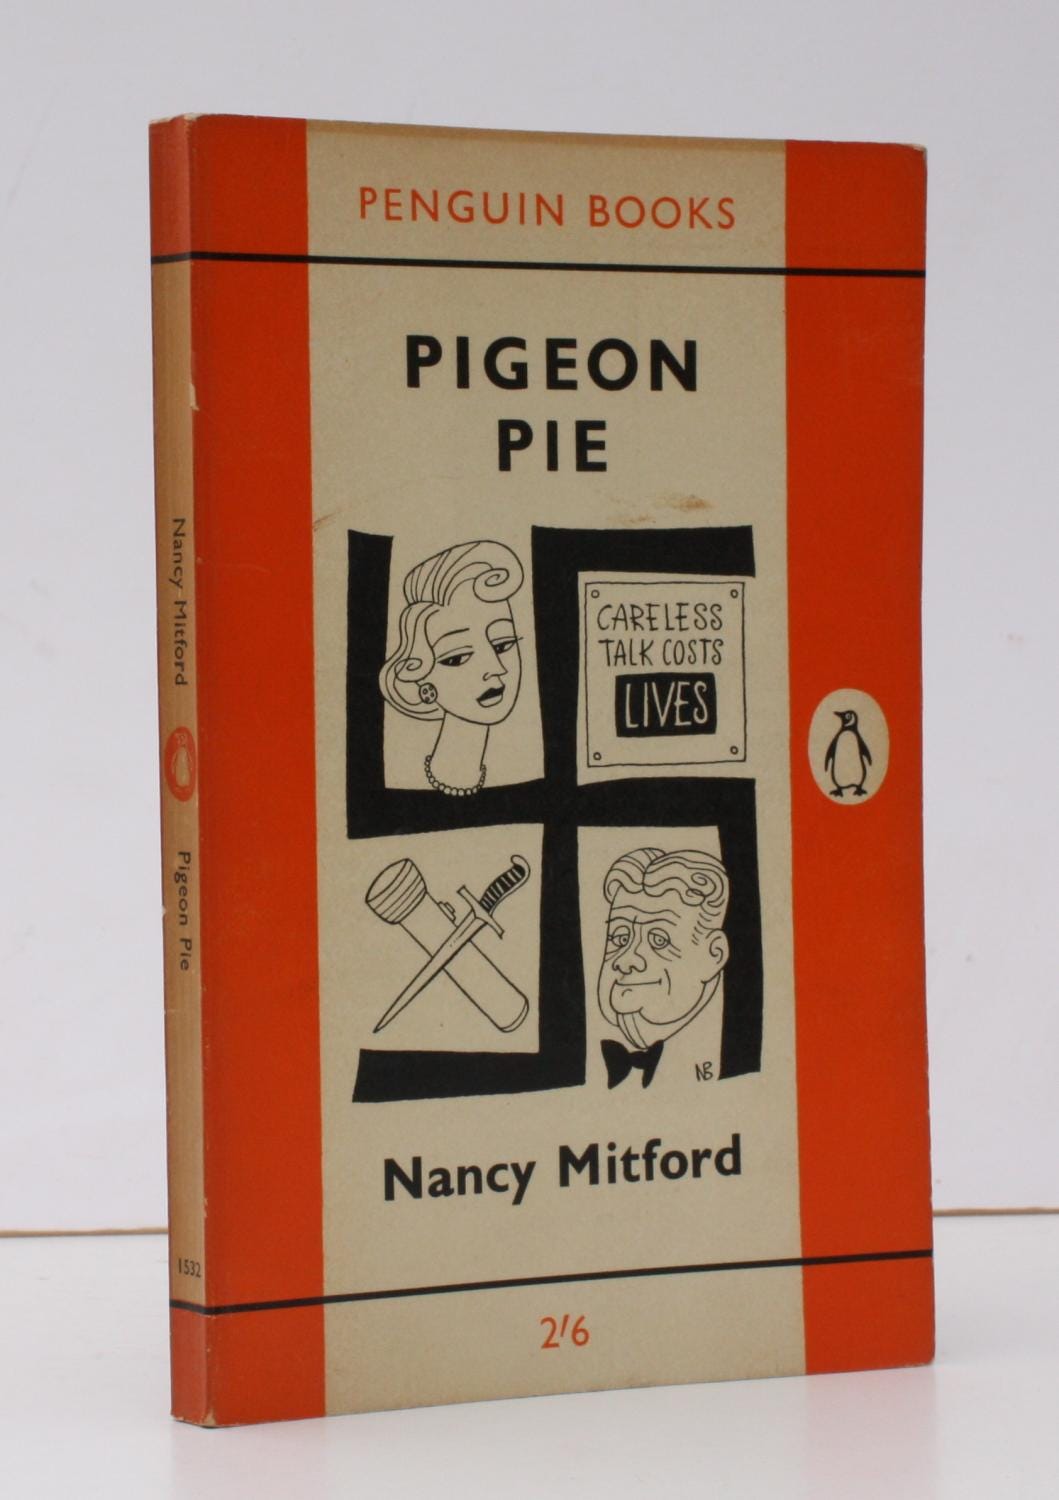 Postwar (1961?) edition of Pigeon Pie, published by Penguin. Photo taken from AbeBooks.